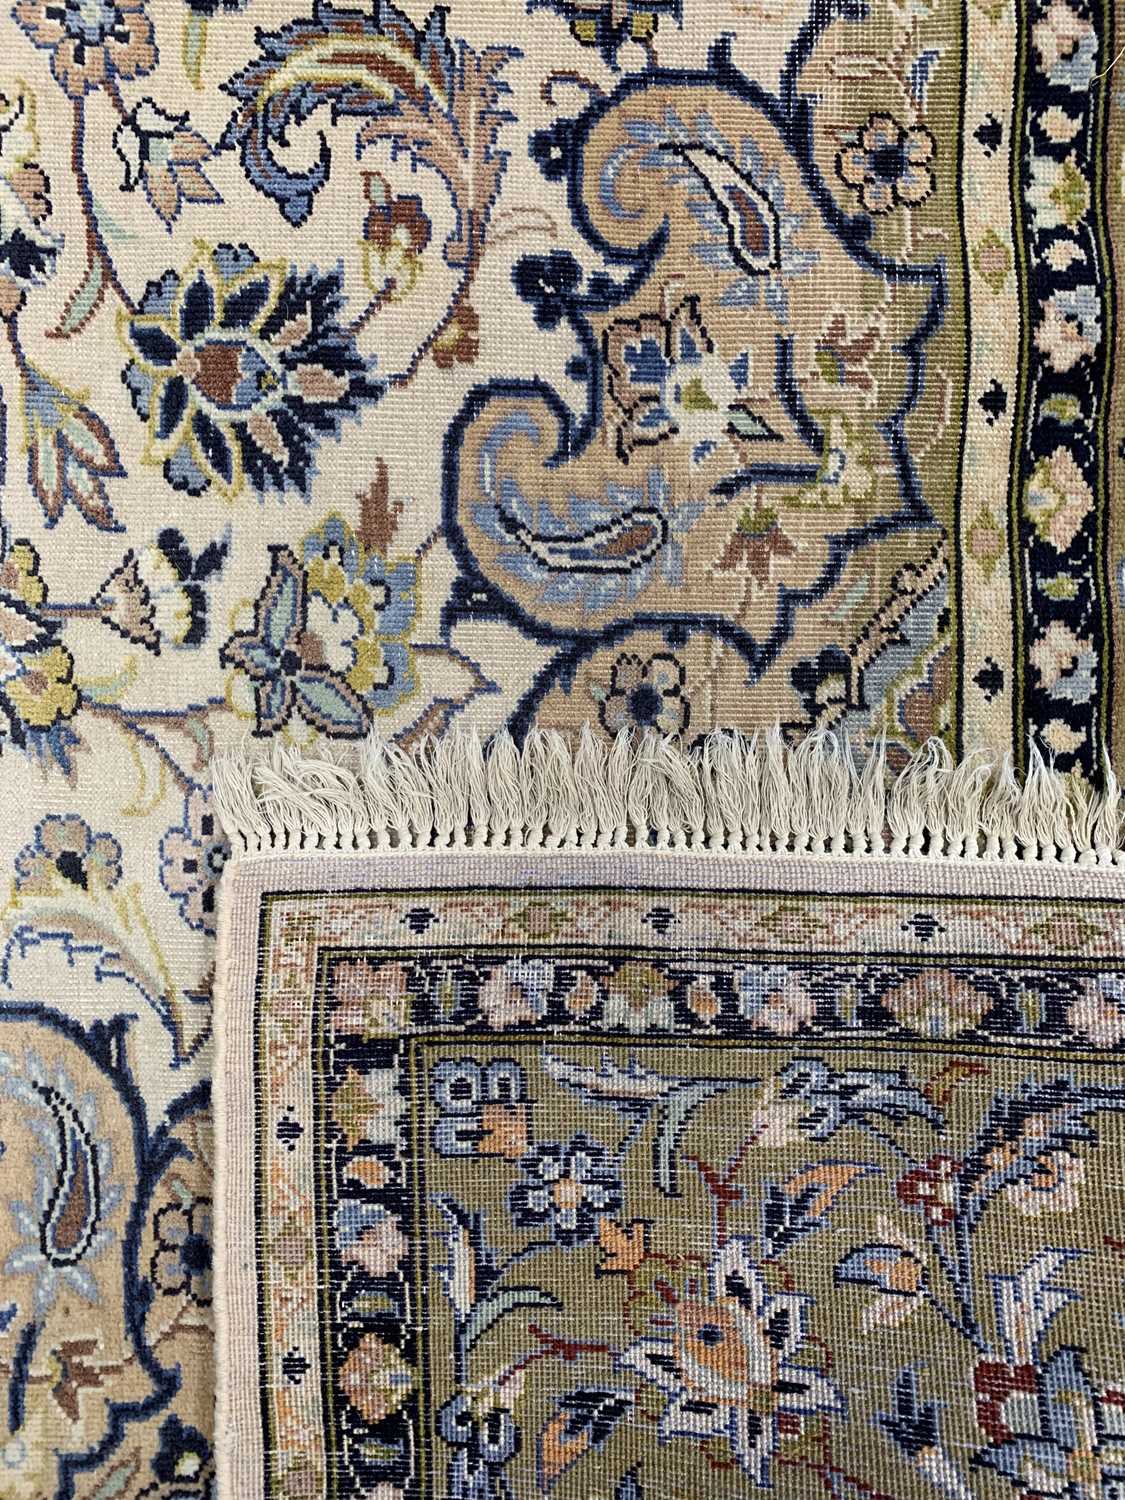 LARGE EASTERN STYLE RUG - multiple bordered with tasselled ends, mainly beige and blue ground with - Image 2 of 3